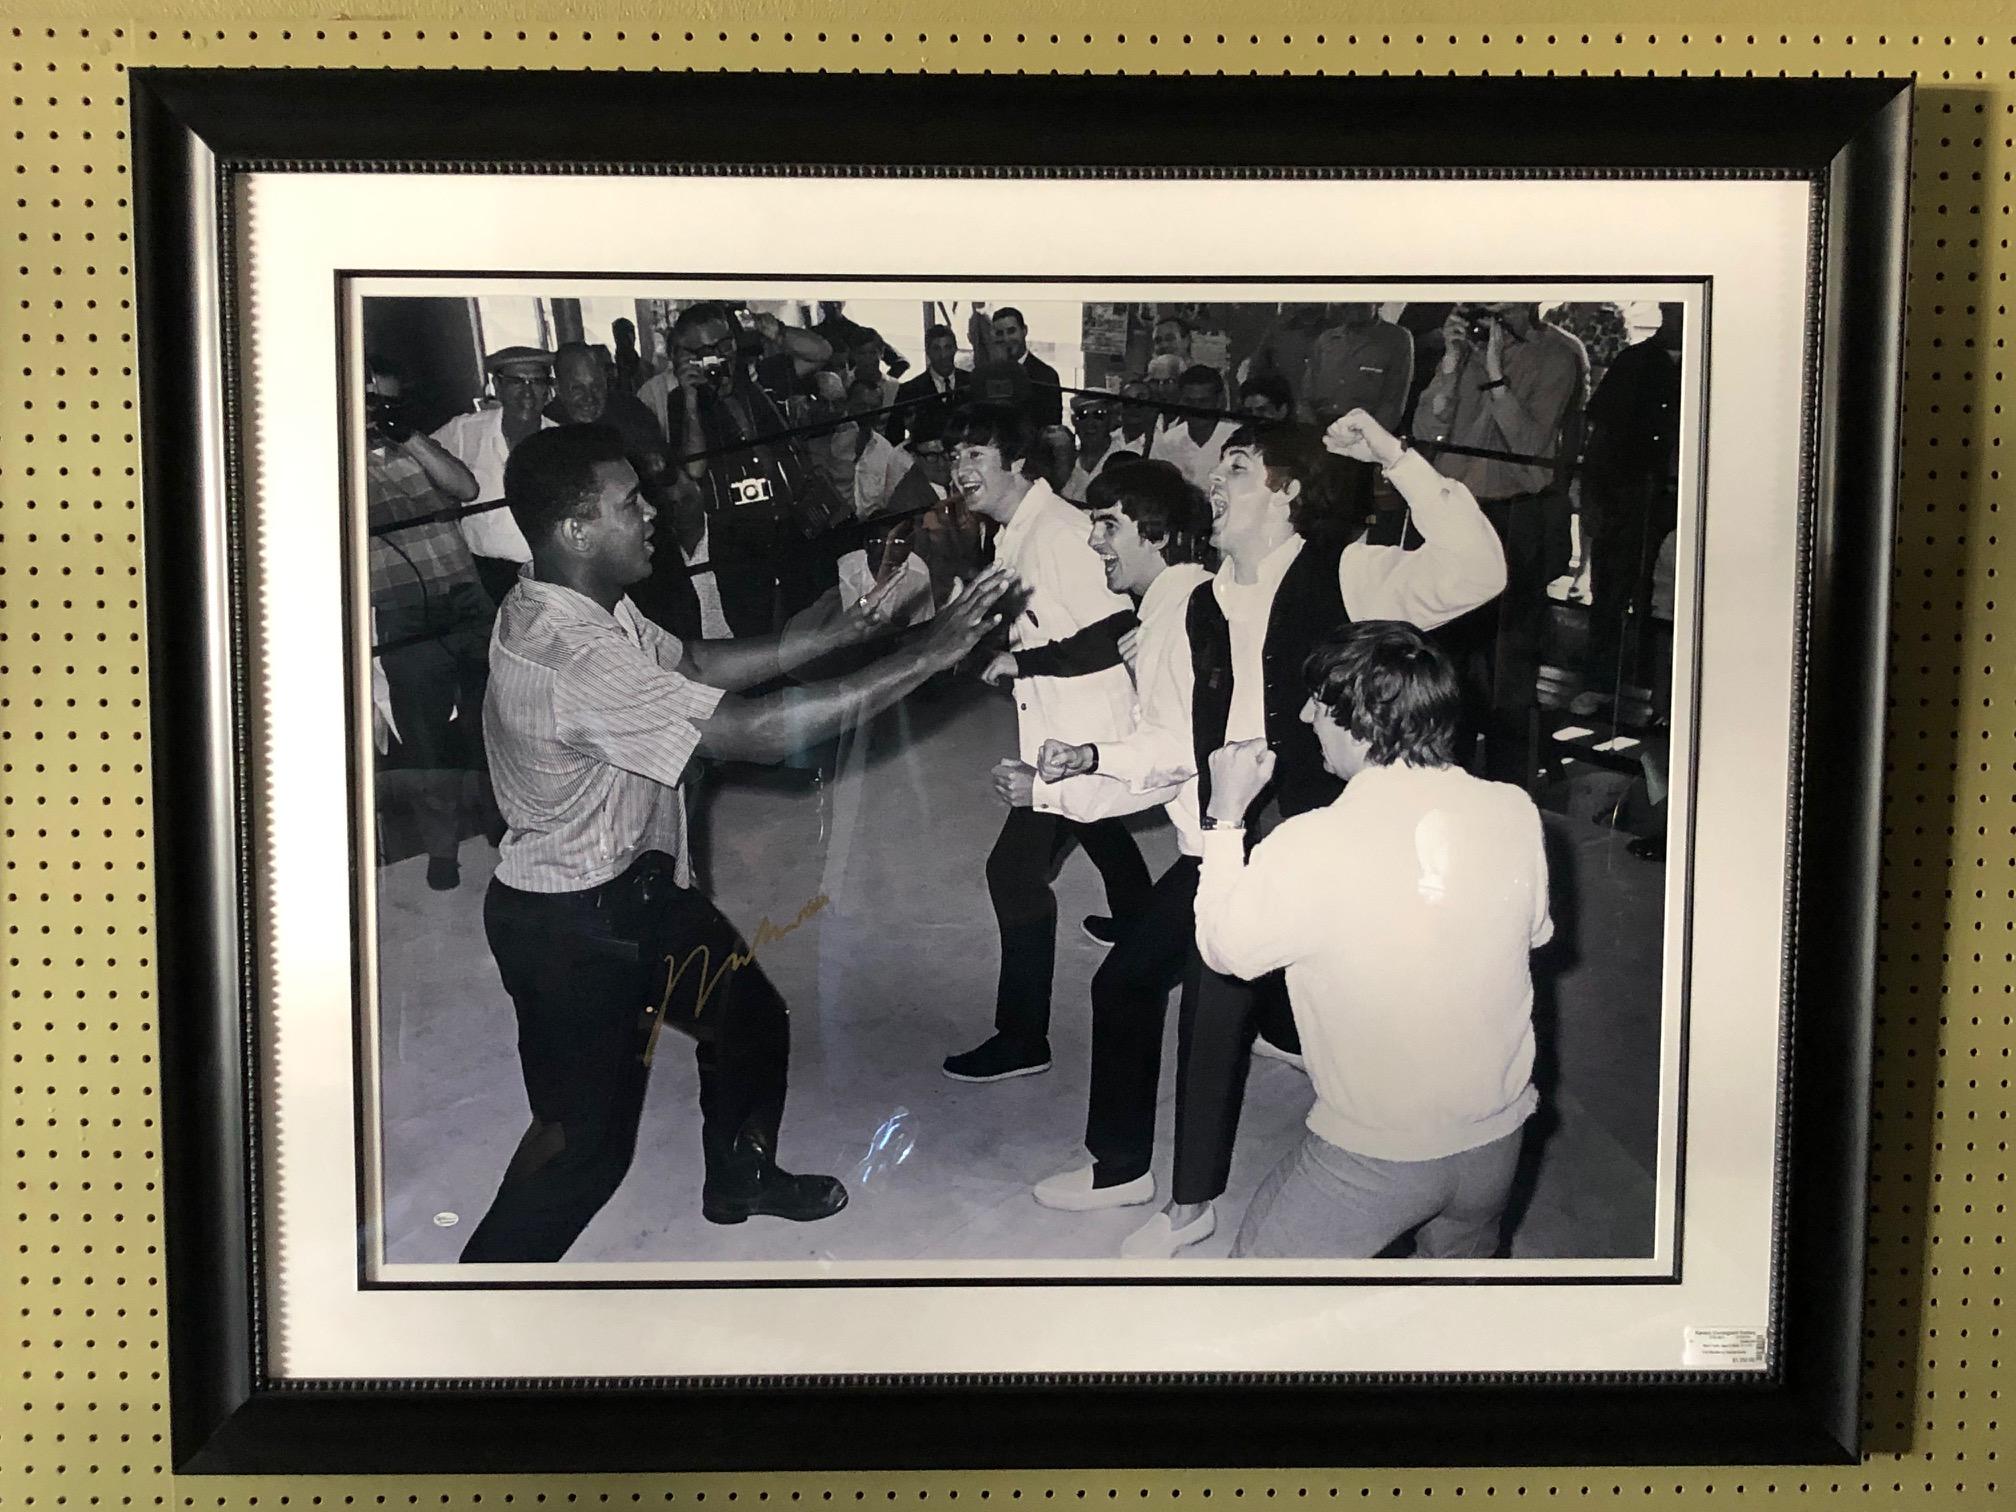 Muhammad Ali Featuring the Beatles Signed Autographed Print COA 2